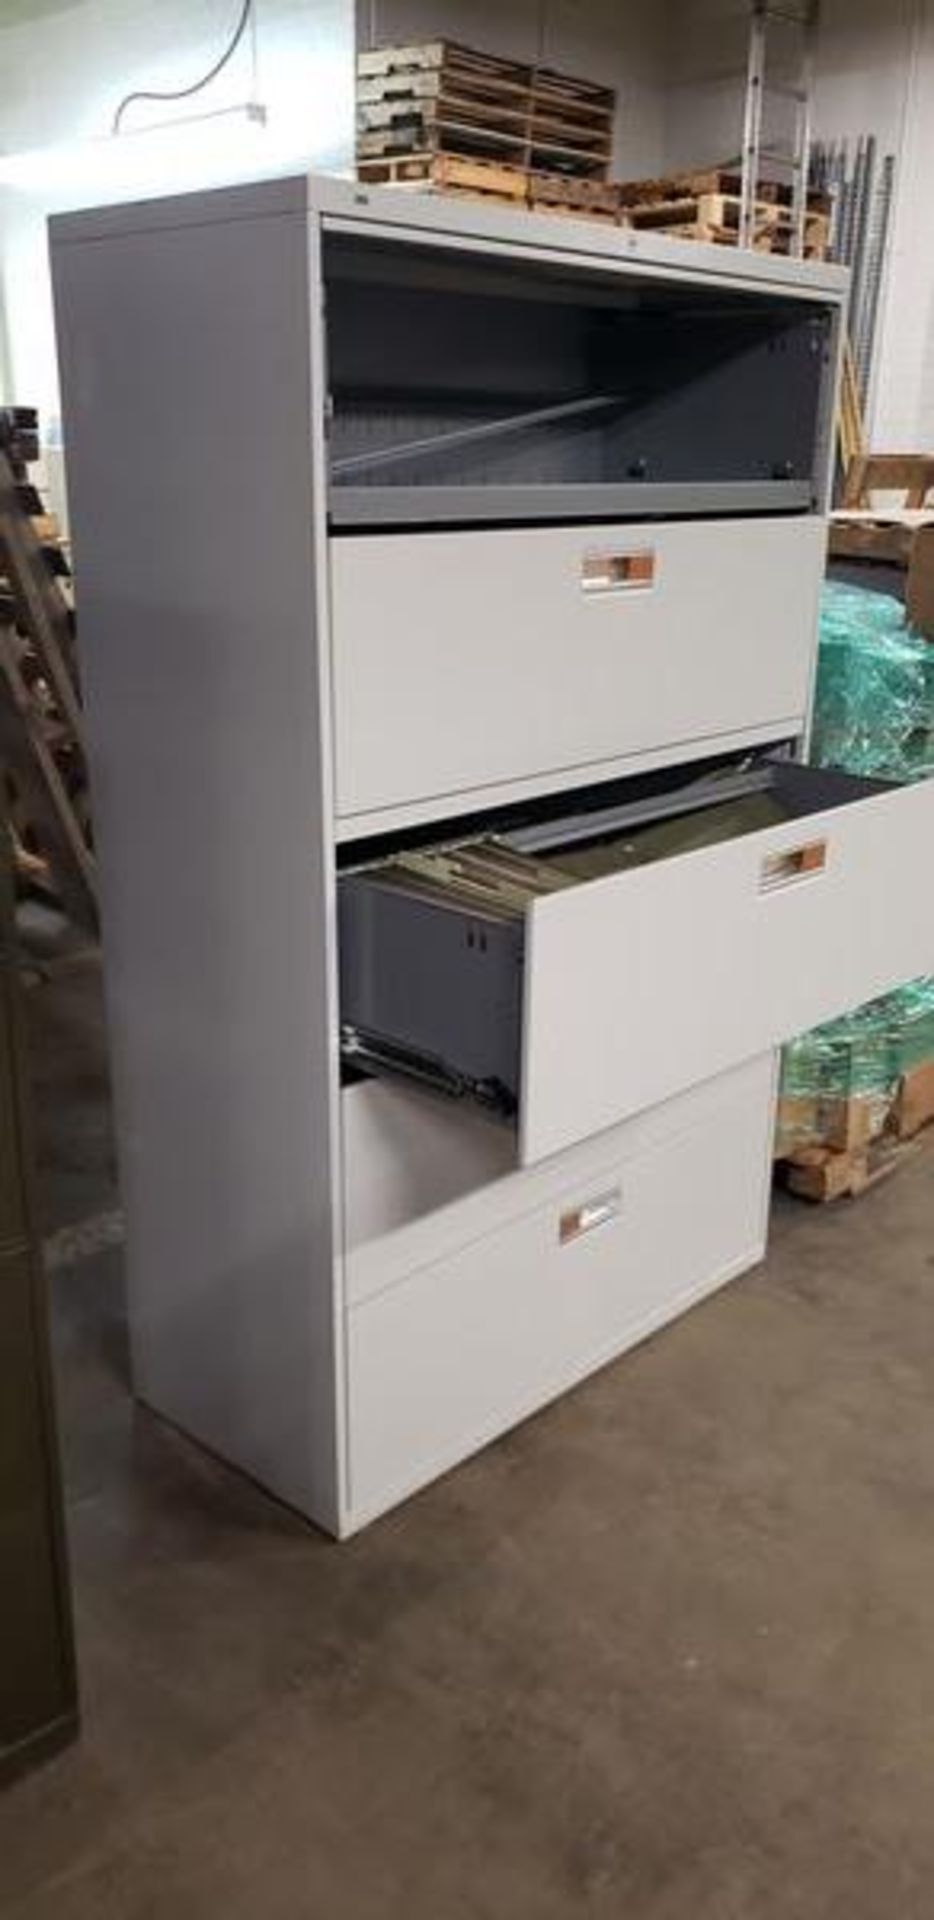 HON 5 DRAWER LATERAL FILE CABINET - Image 2 of 2